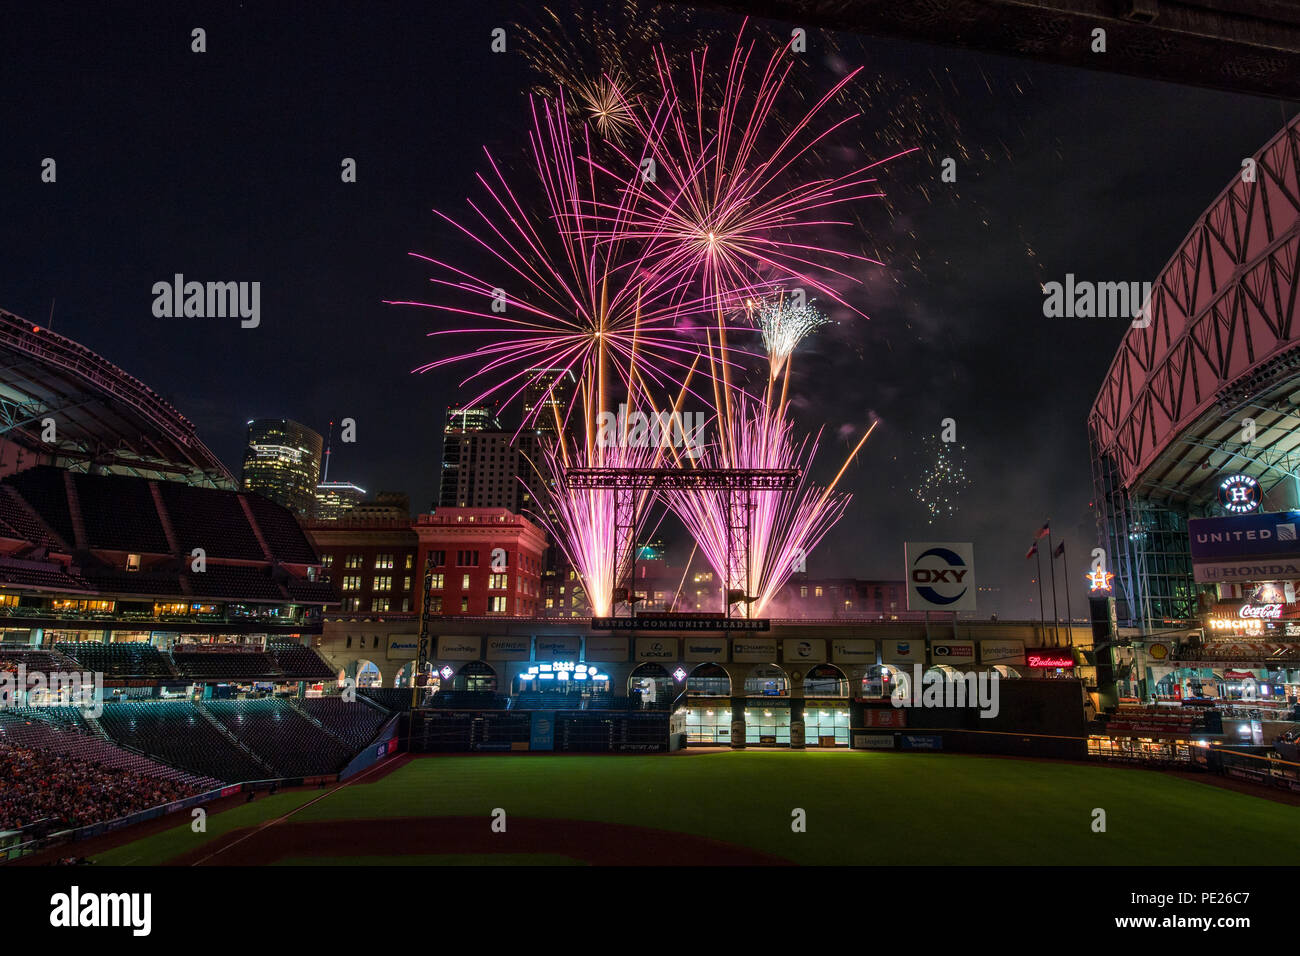 August 10, 2018: The Friday Night Fireworks show can be seen at Minute Maid  Park after a Major League Baseball game between the Houston Astros and the  Seattle Mariners on 1970s night